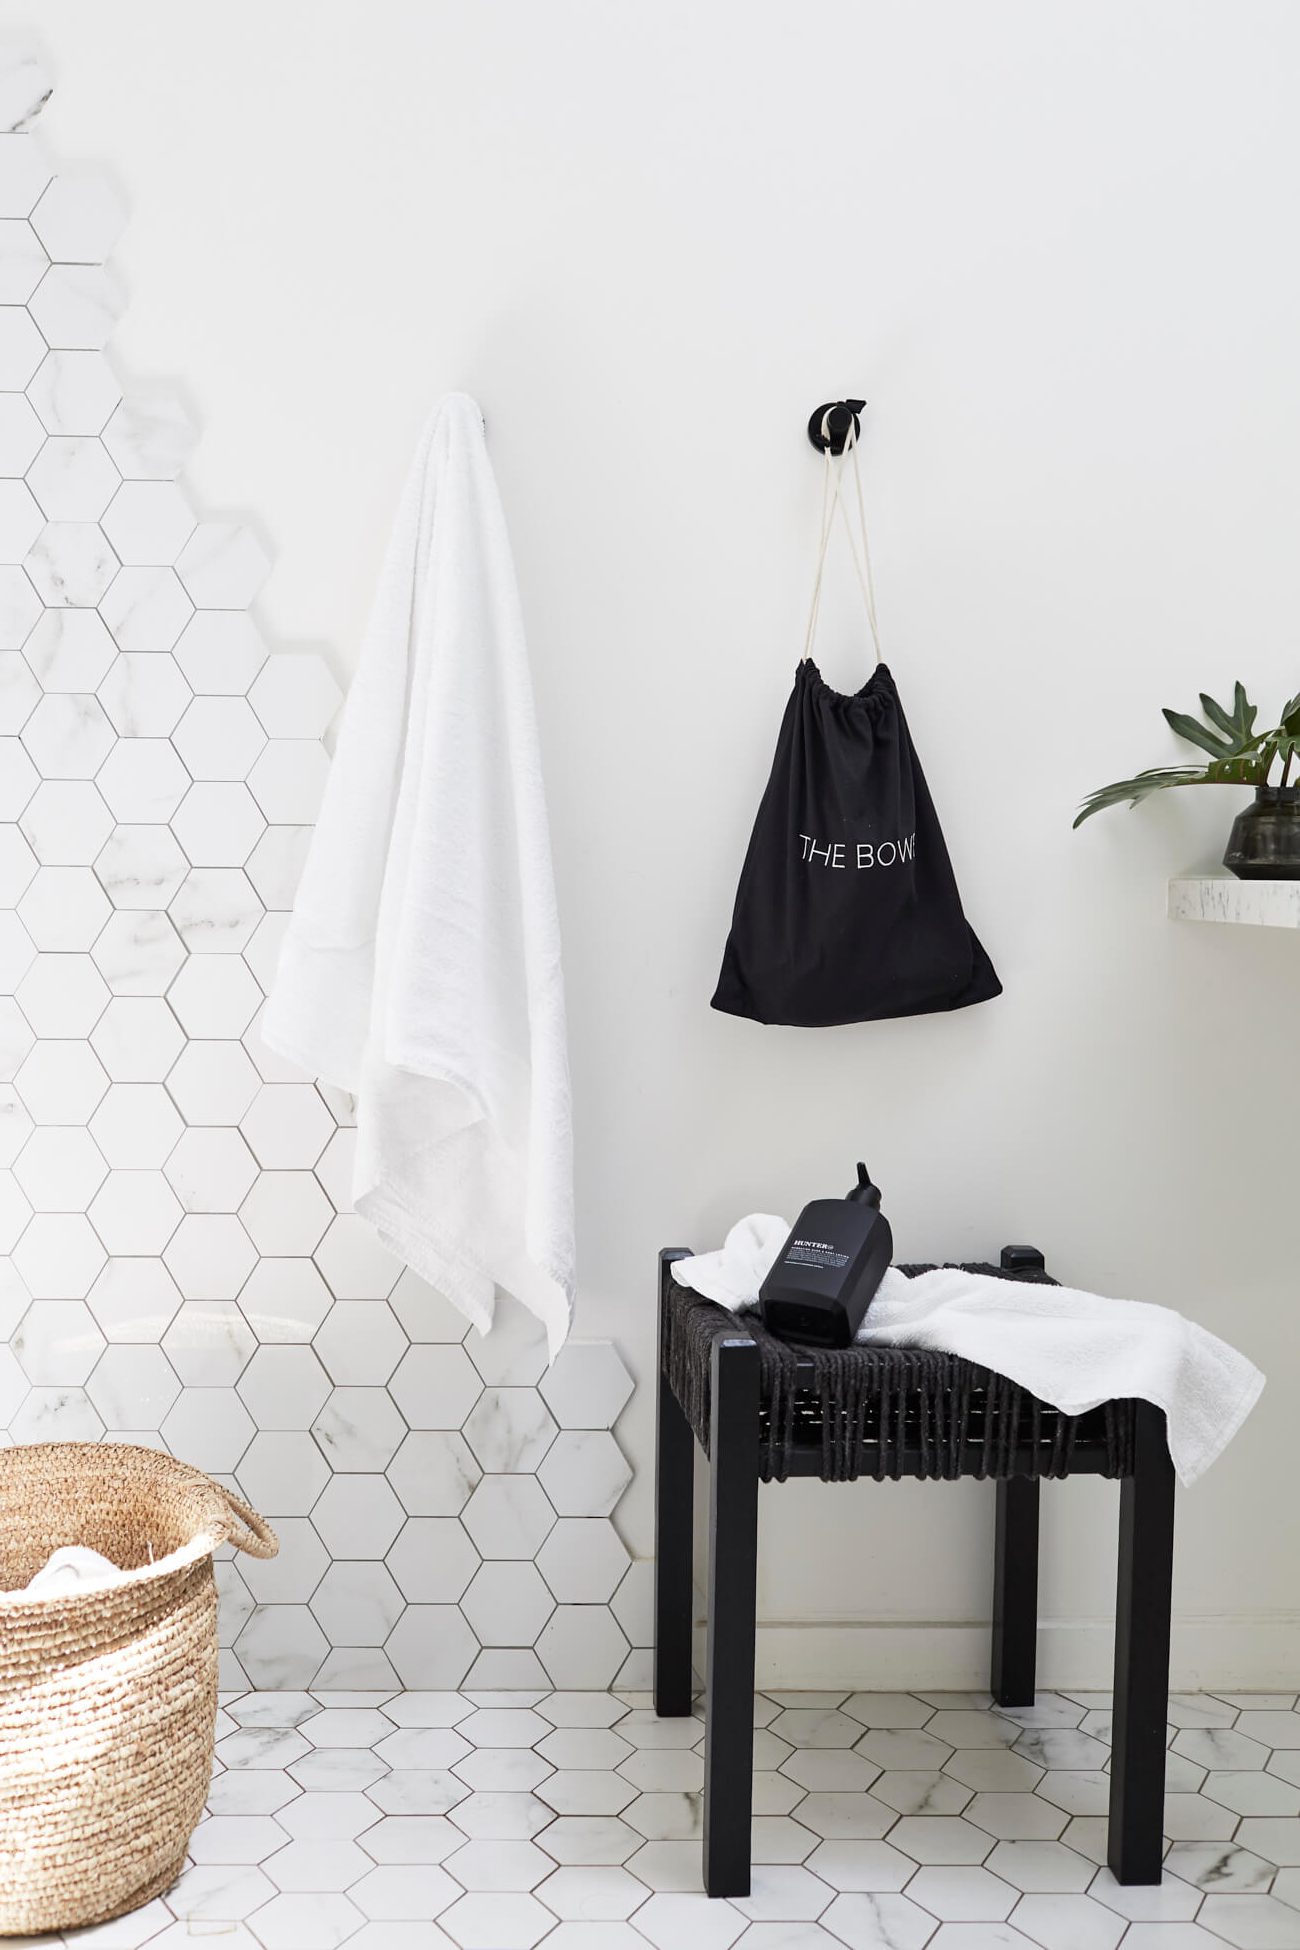 Hexagonal marble feature tiles in the shower of the Bower House, The Bower Byron Bay